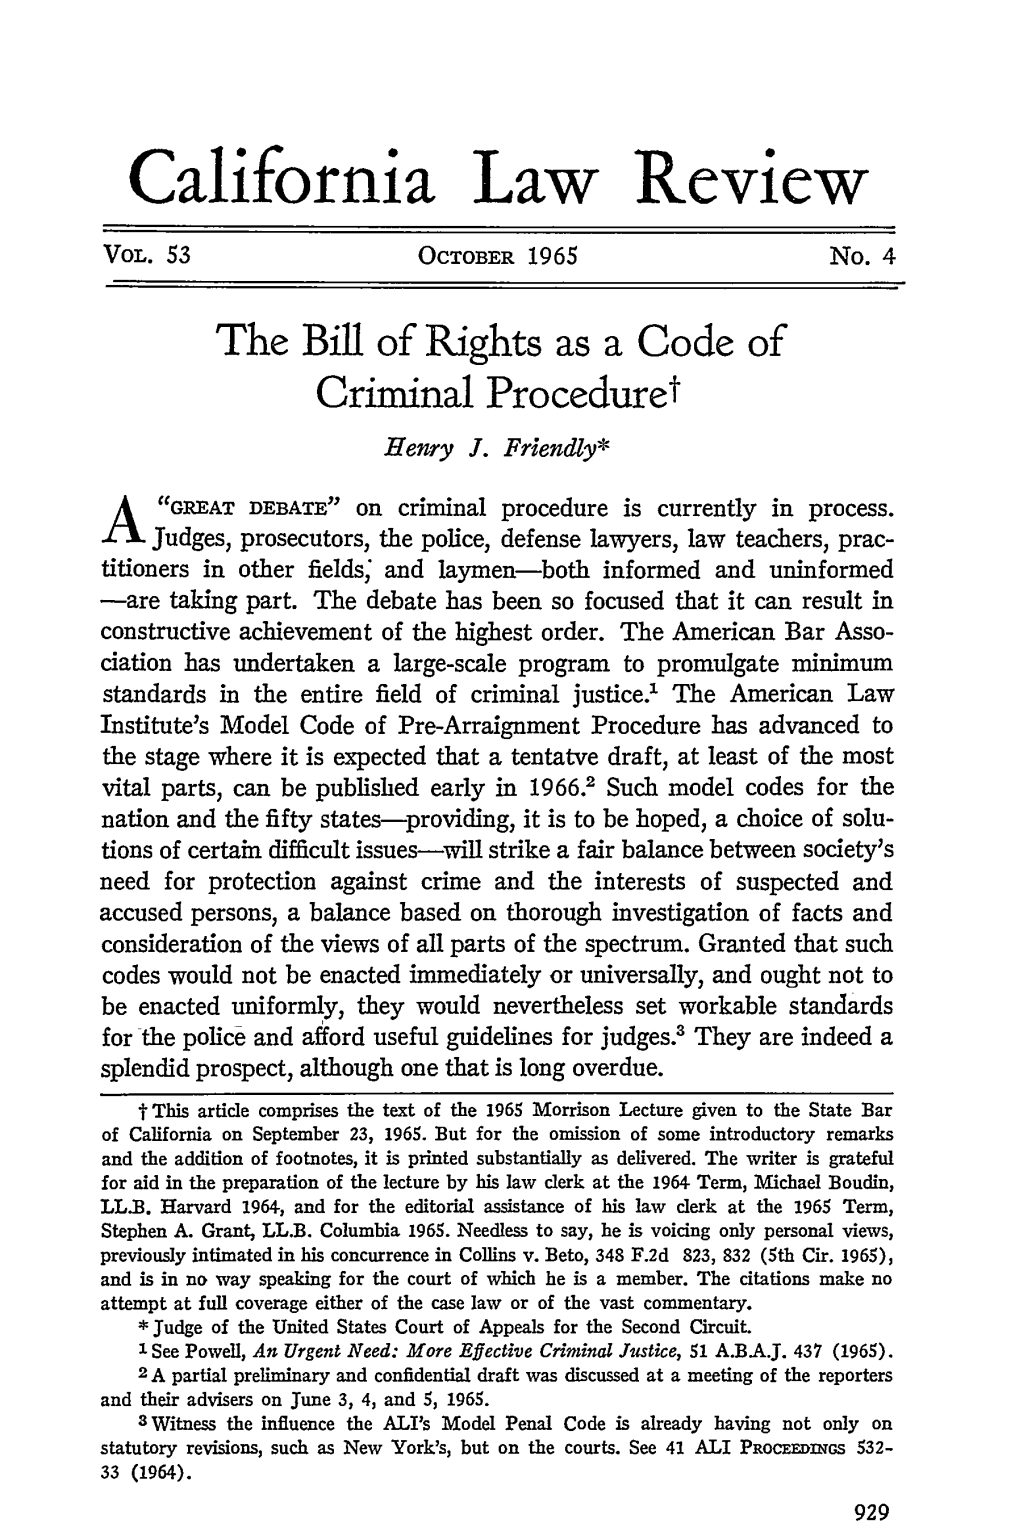 The Bill of Rights As a Code of Criminal Proceduret Henry J